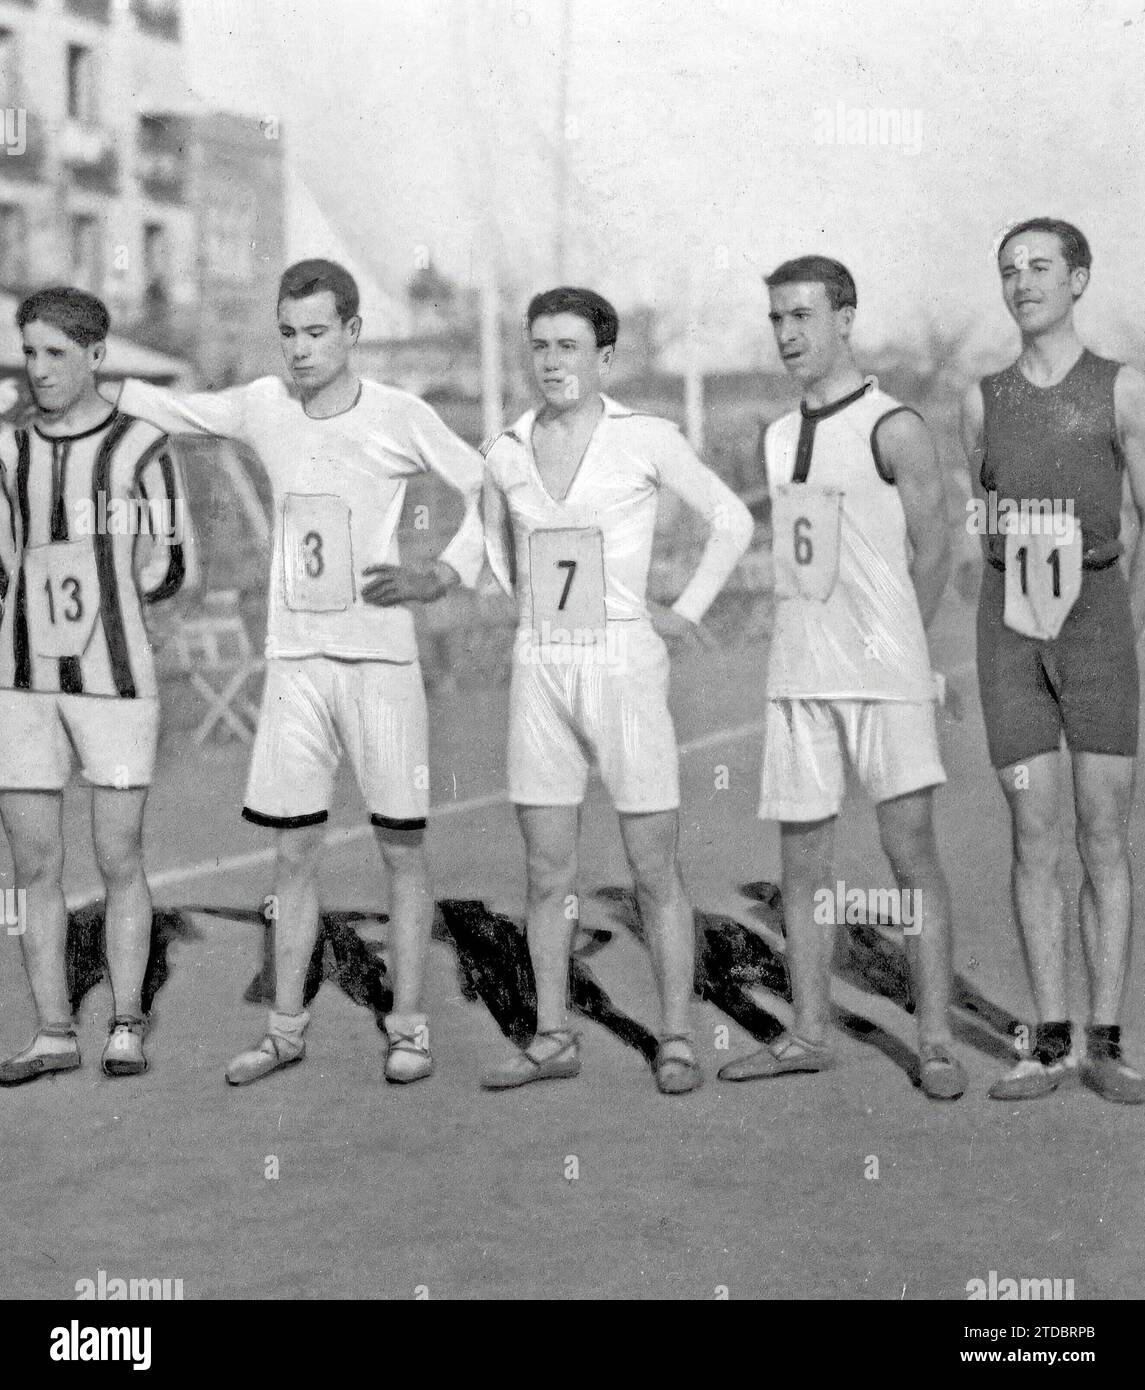 12/31/1916. Foot Races. The Winners of the 'Cros-Country' of Gymnastics. From left to right: 1.-Emilio González; 2.-Hilario Valencia; 3.-Francisco Morales; 4.-Antonio Fernández and 5 Gonzalo Leyra. Credit: Album / Archivo ABC / Julio Duque Stock Photo